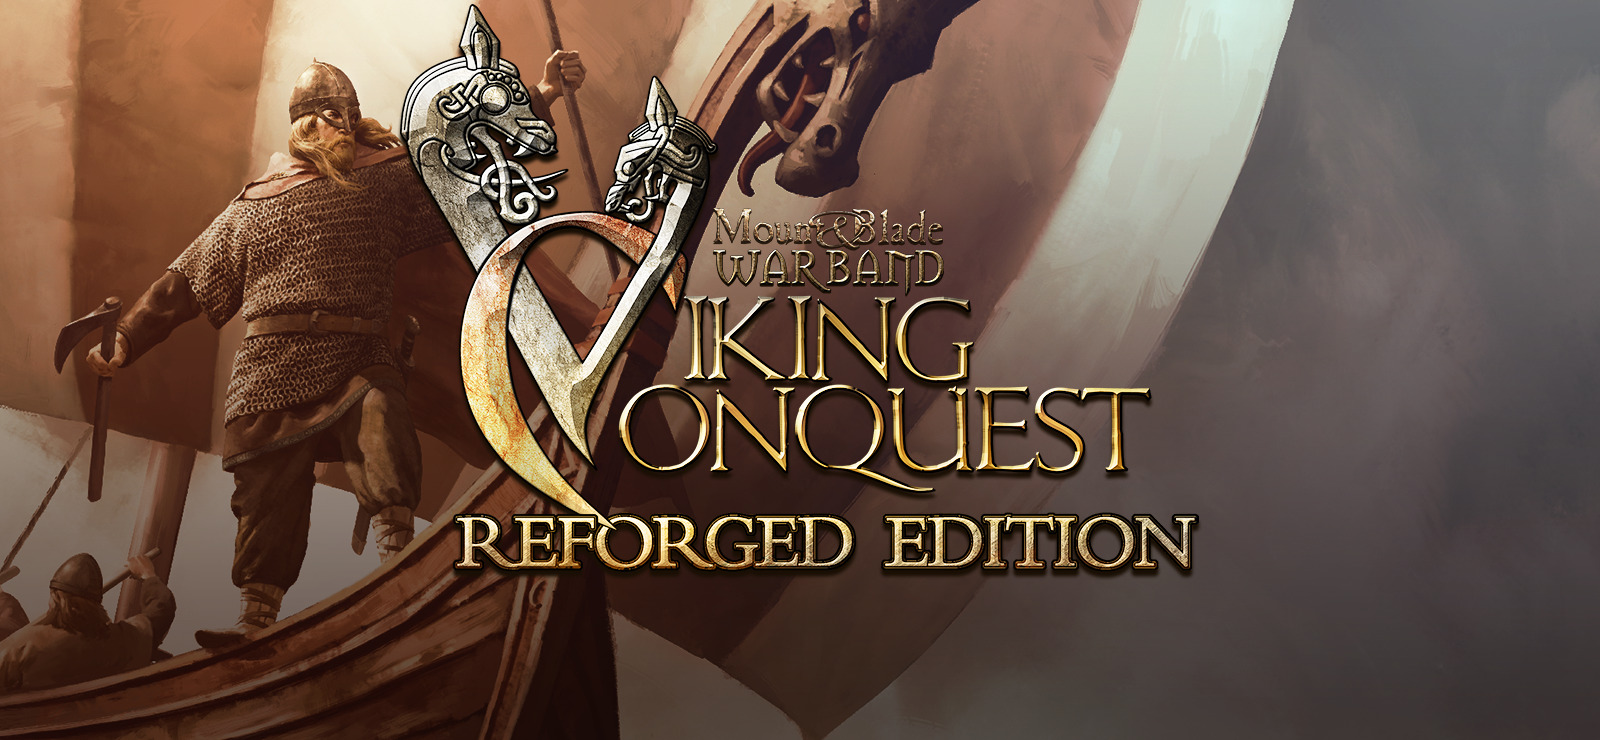 Mount & Blade: Warband - Viking Conquest Reforged Edition on GOG.com